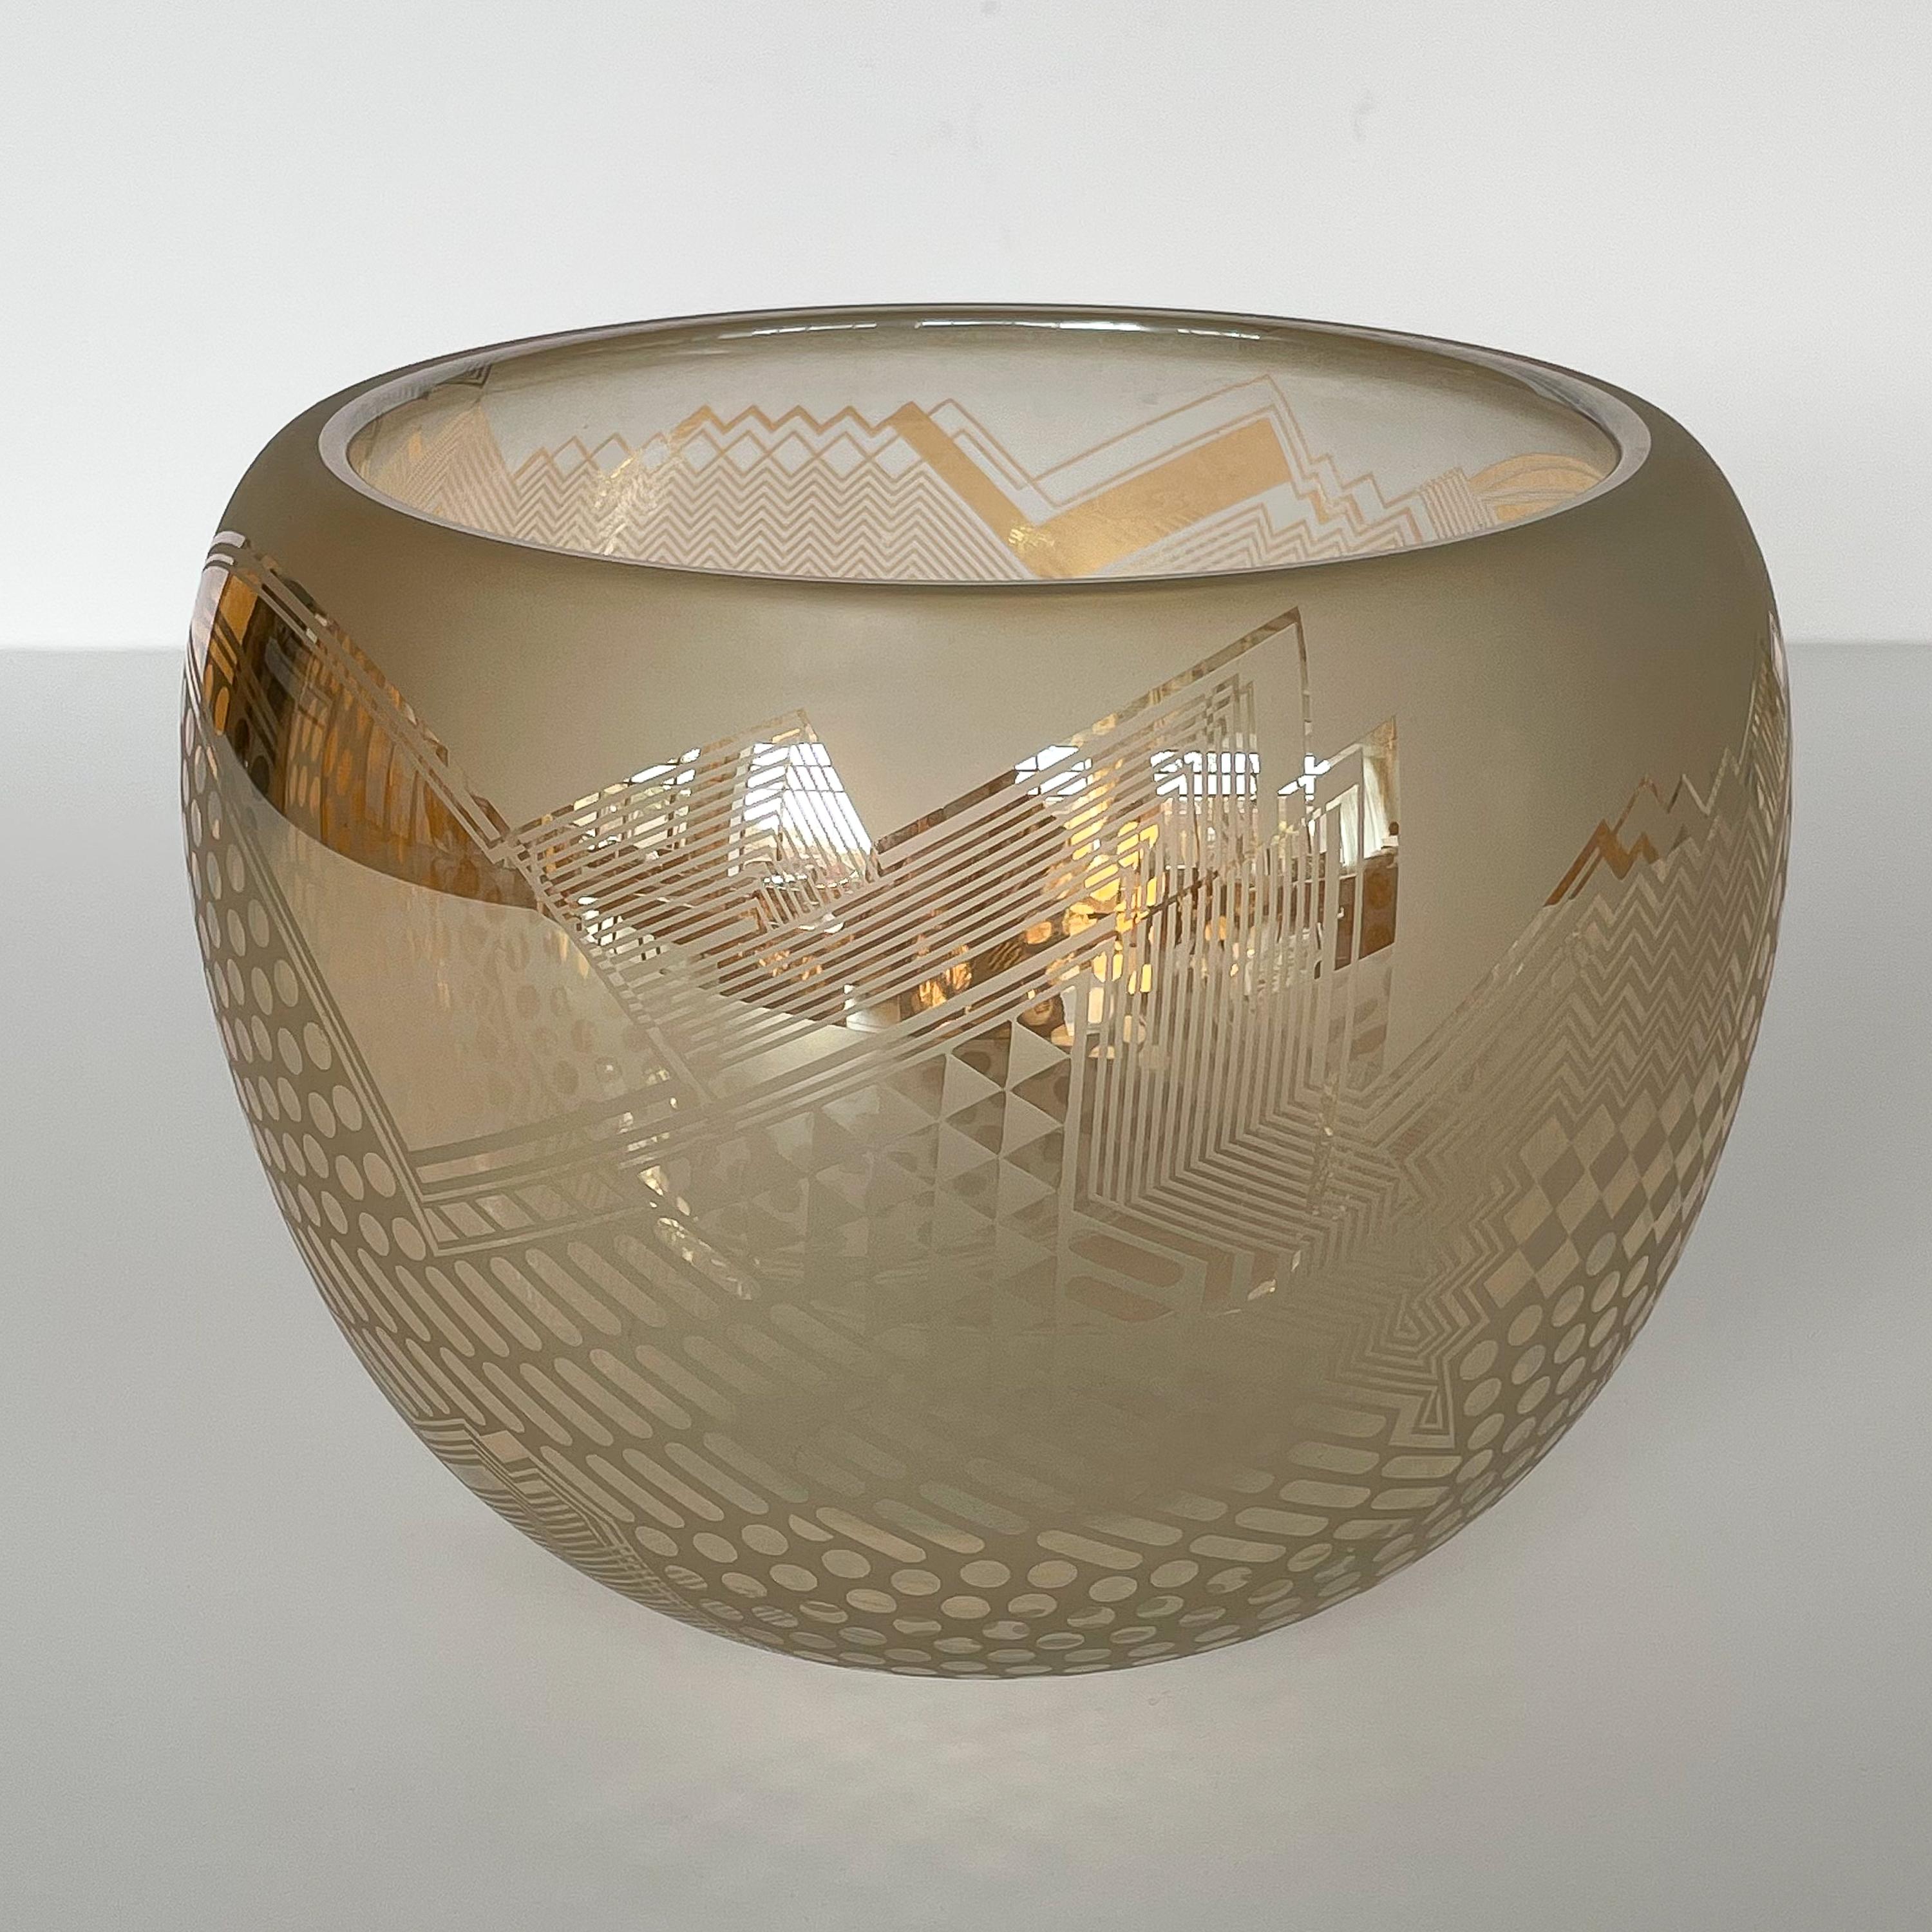 A studio glass bowl by Michelle Schoen and Bob Toensing. Frosted and gold mirrored thick hand blown glass. Geometric decorations. Signed, dated 1994 and numbered 824. Measures 7